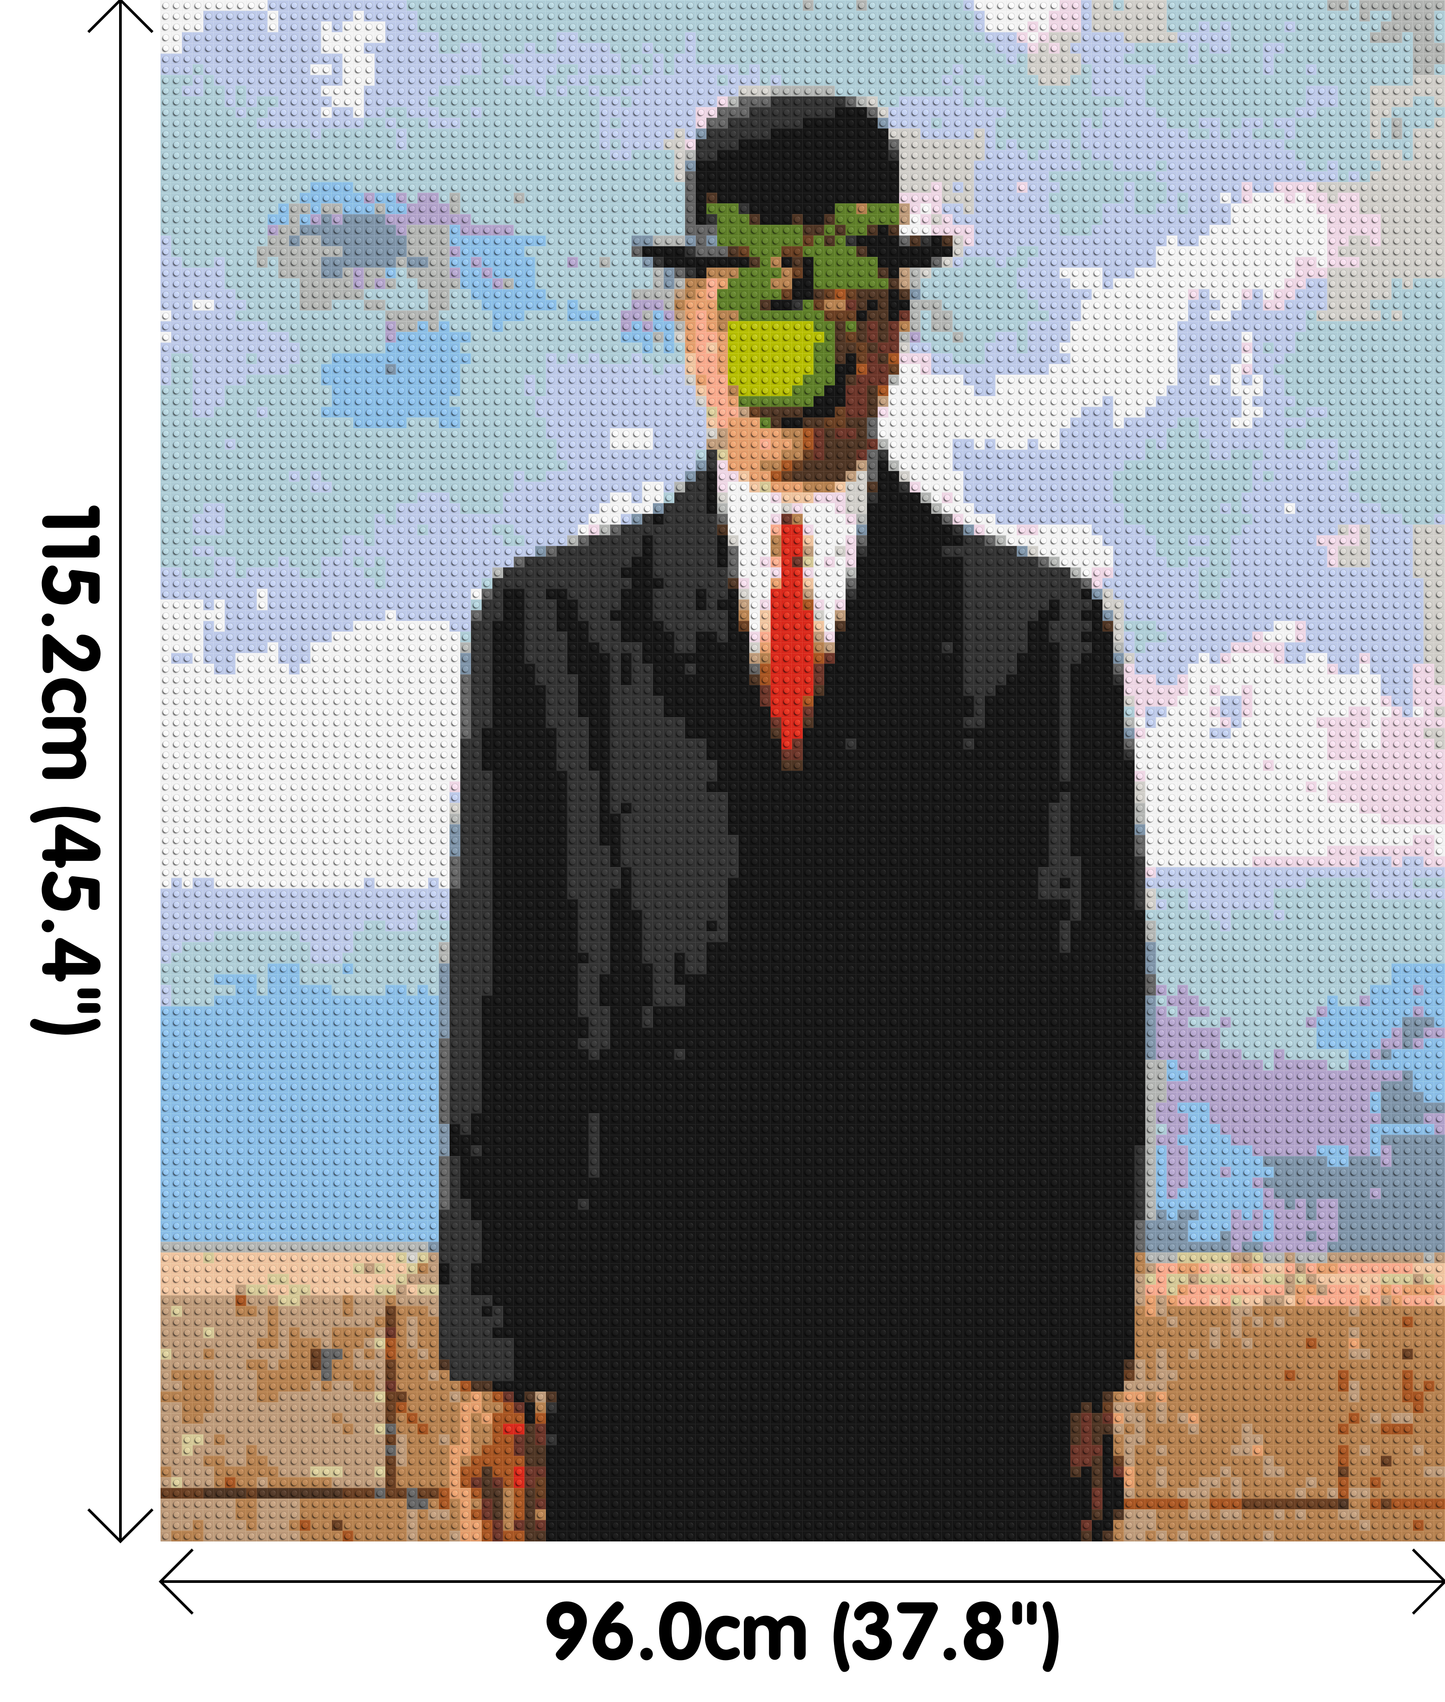 The Son of Man by René Magritte - Brick Art Mosaic Kit 5x6 large